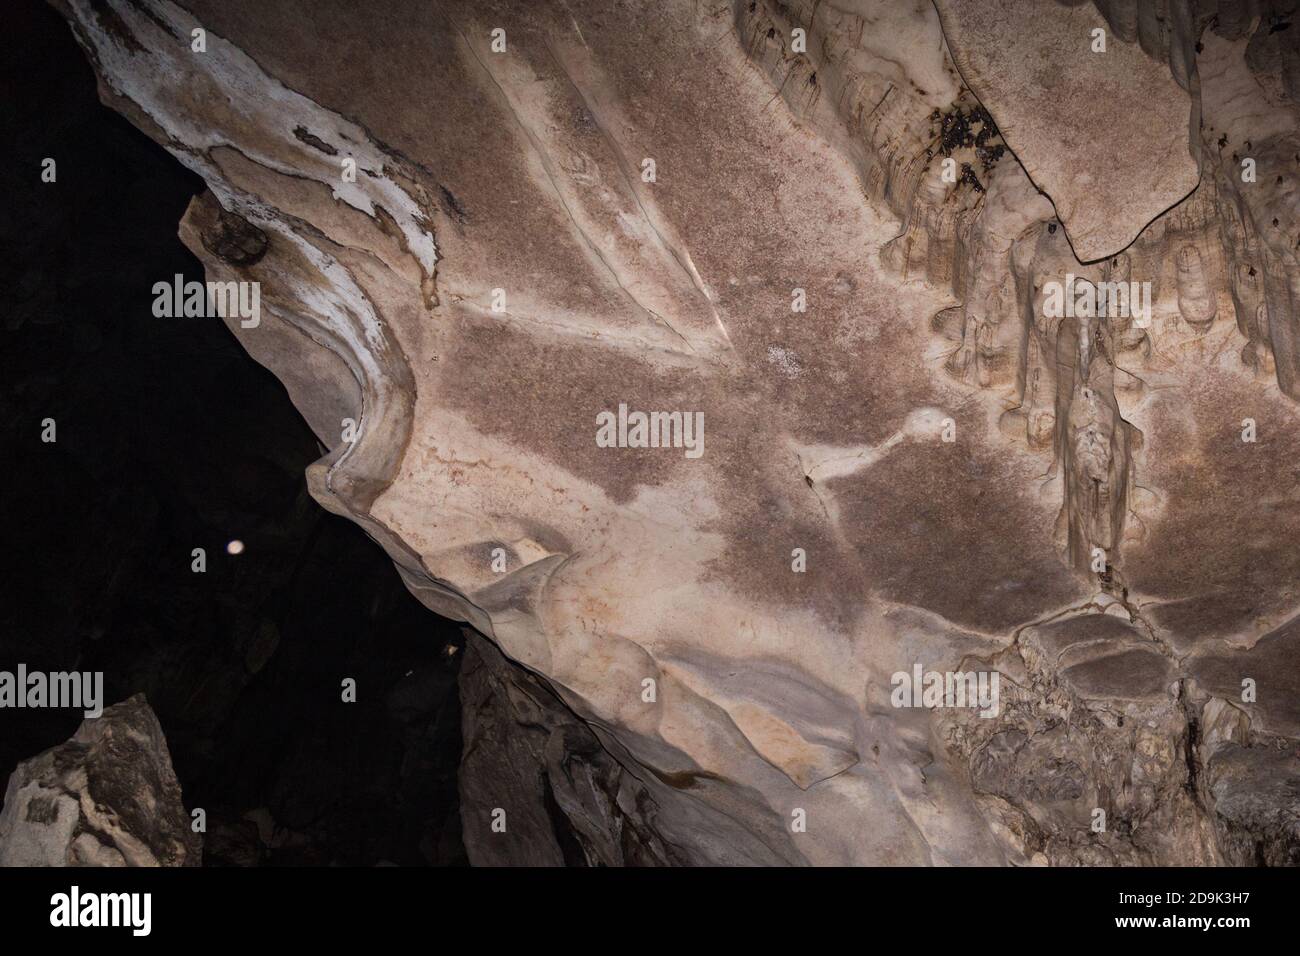 Bats residing on ceiling of the caves at Niah National Park Stock Photo